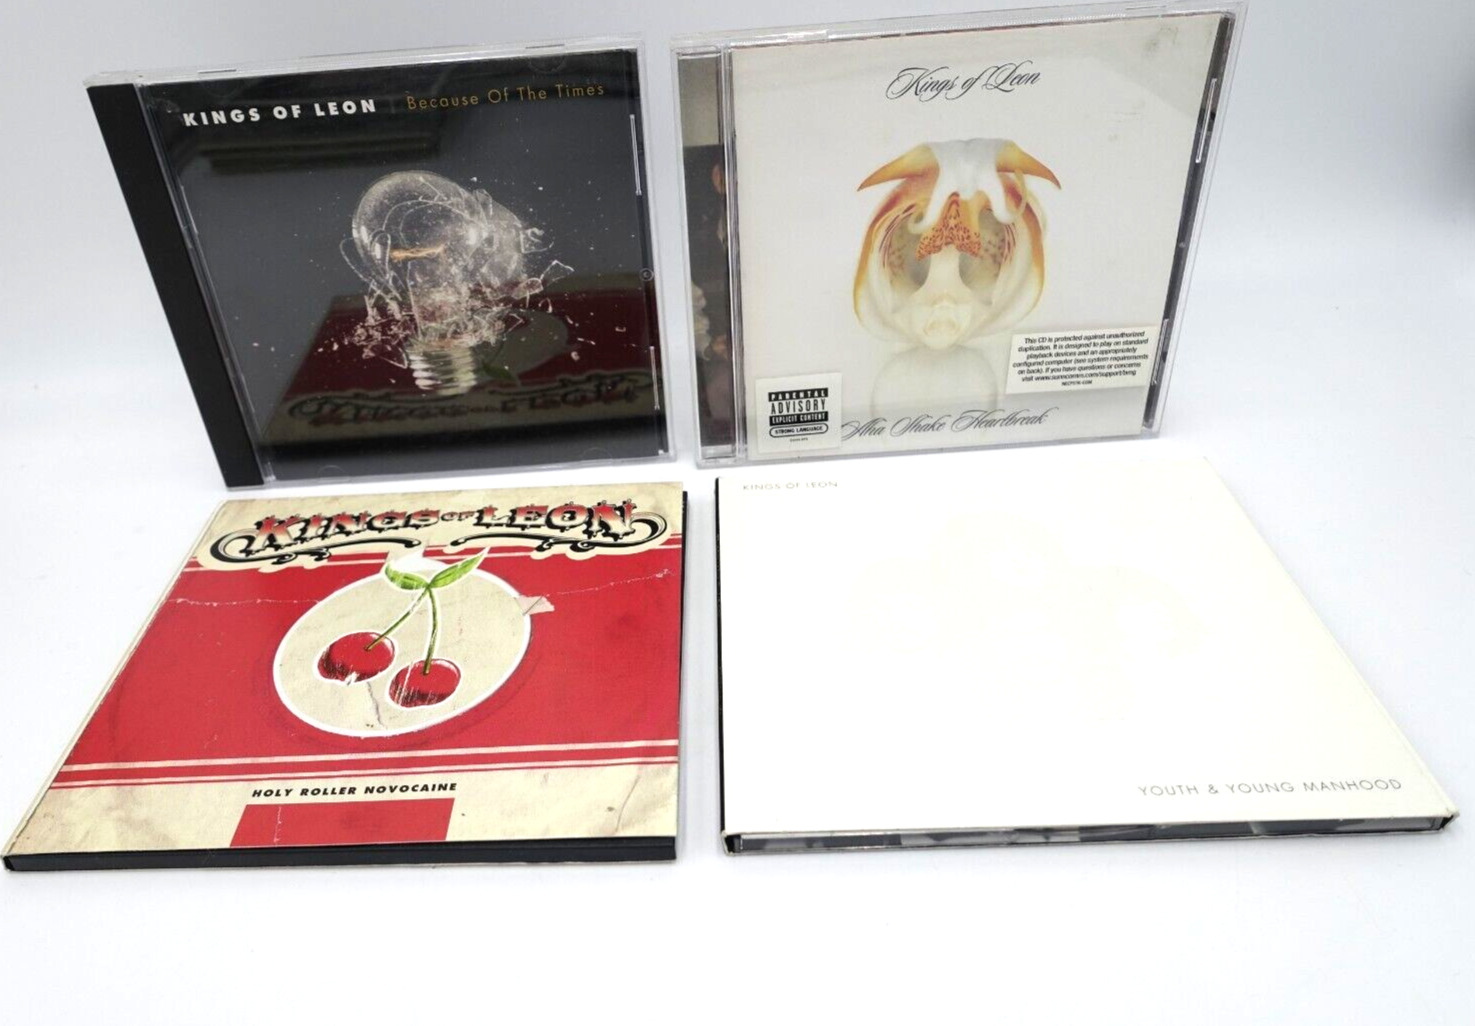 Kings of Leon 4 CD Lot - Aha Shake Holy Roller Because of Times Young Manhood